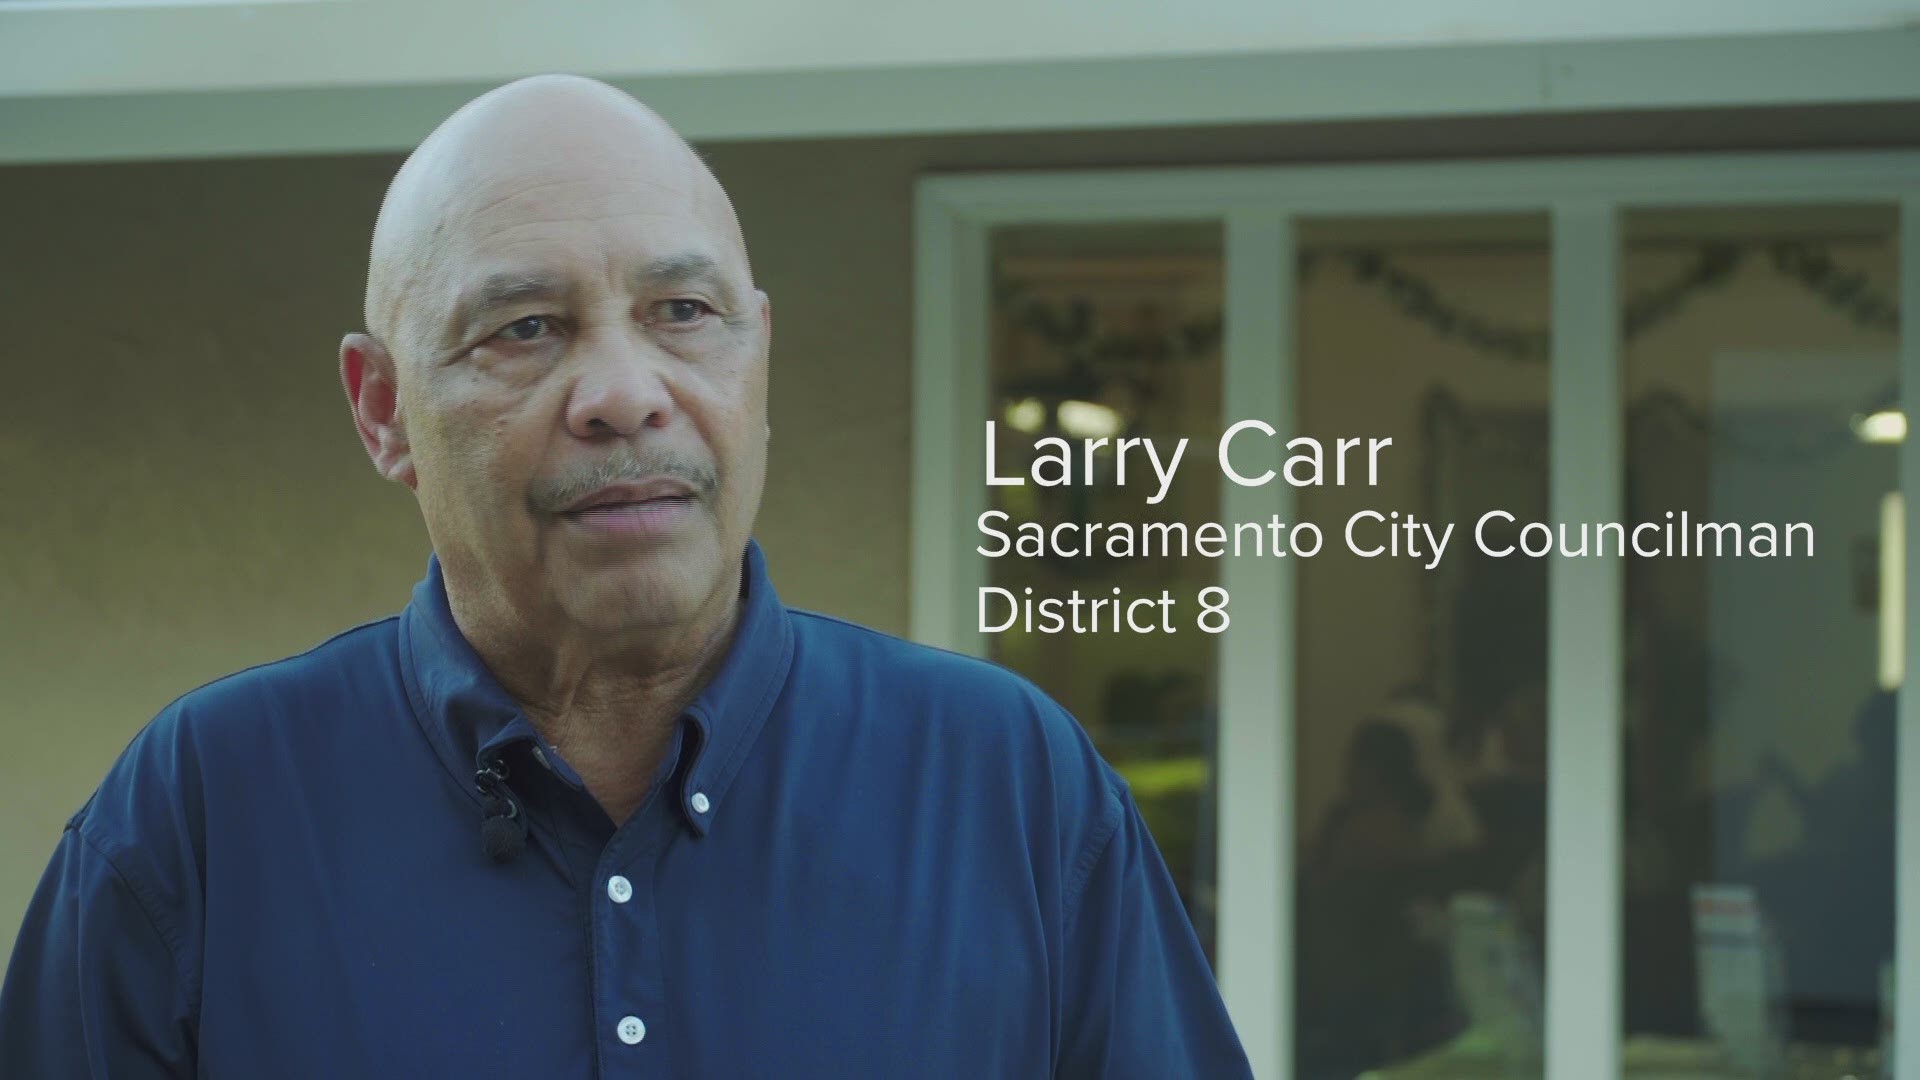 Sacramento's Meadowview neighborhood has been in the news a lot in the past year, District 8 councilman,  Larry Carr talks with Becca Habegger about future plans for the neighborhood and its reputation. Carr would like to see more done with vacant properties, more lighting and parking, and removing chain link fences. He also addresses the issue of homelessness in the city.